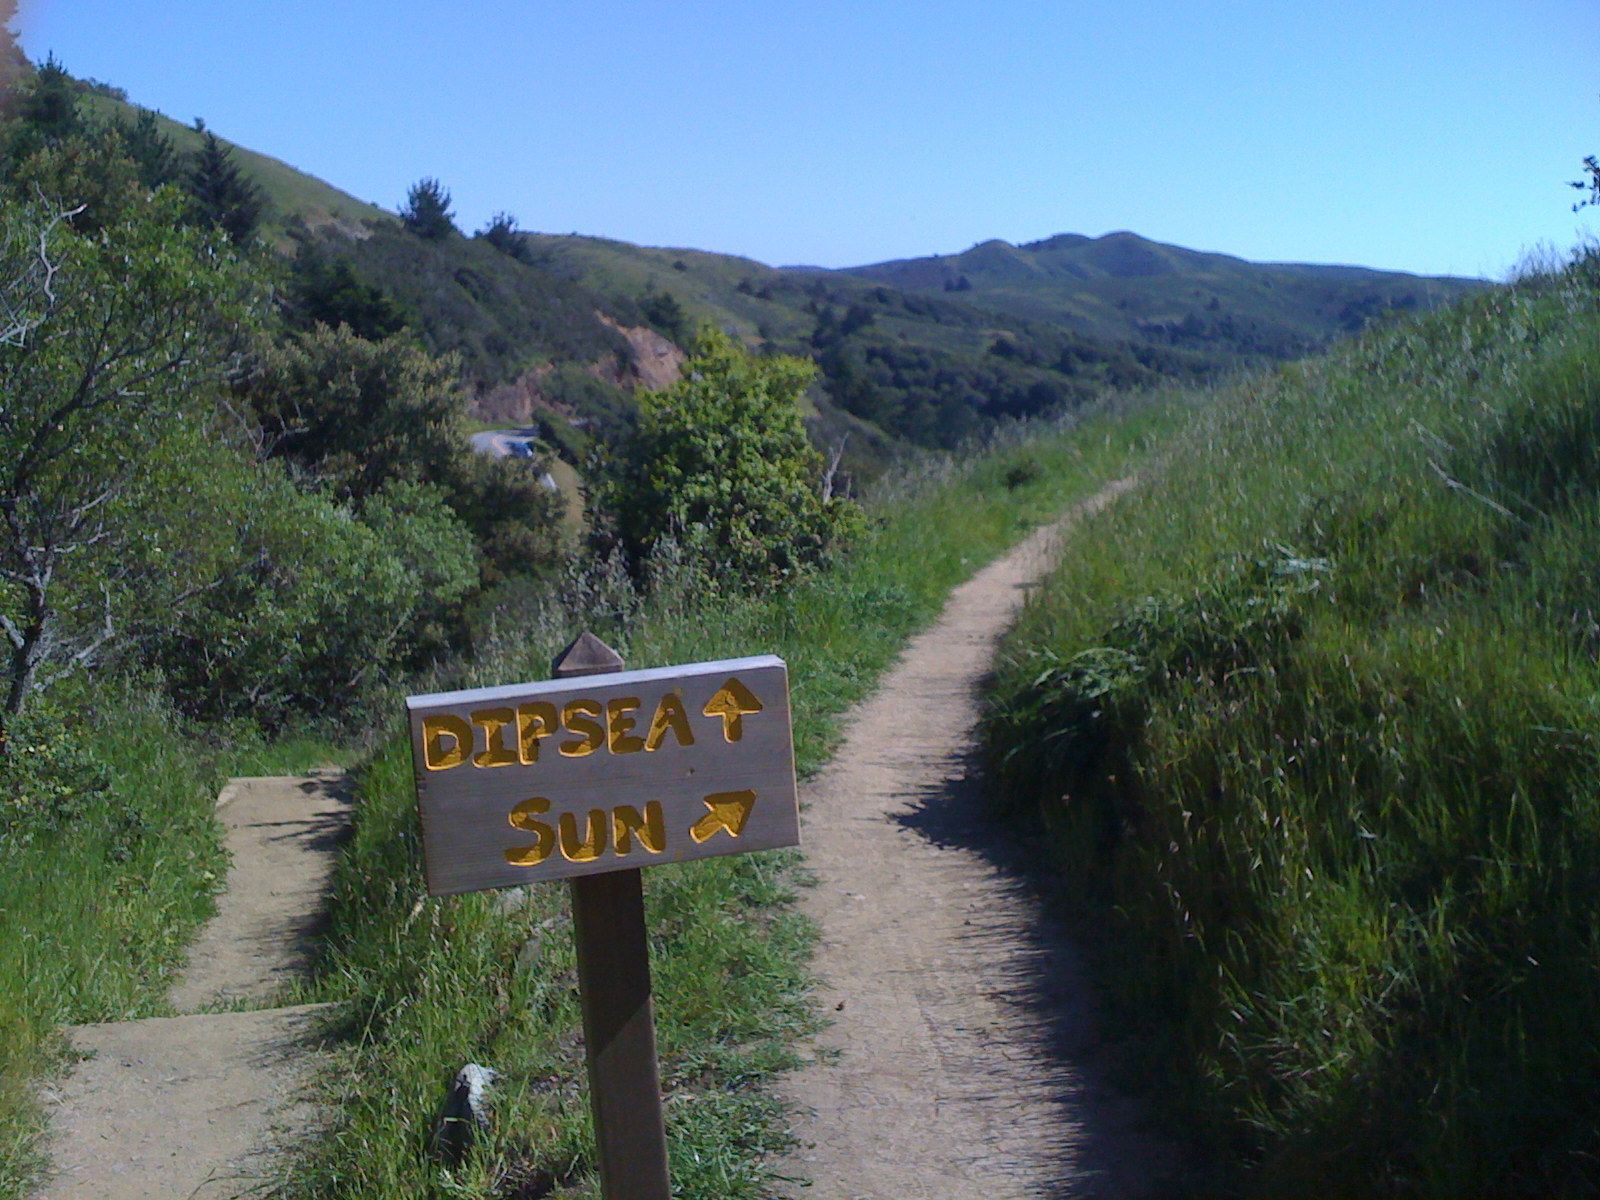 Dipsea and Sun trail intersection